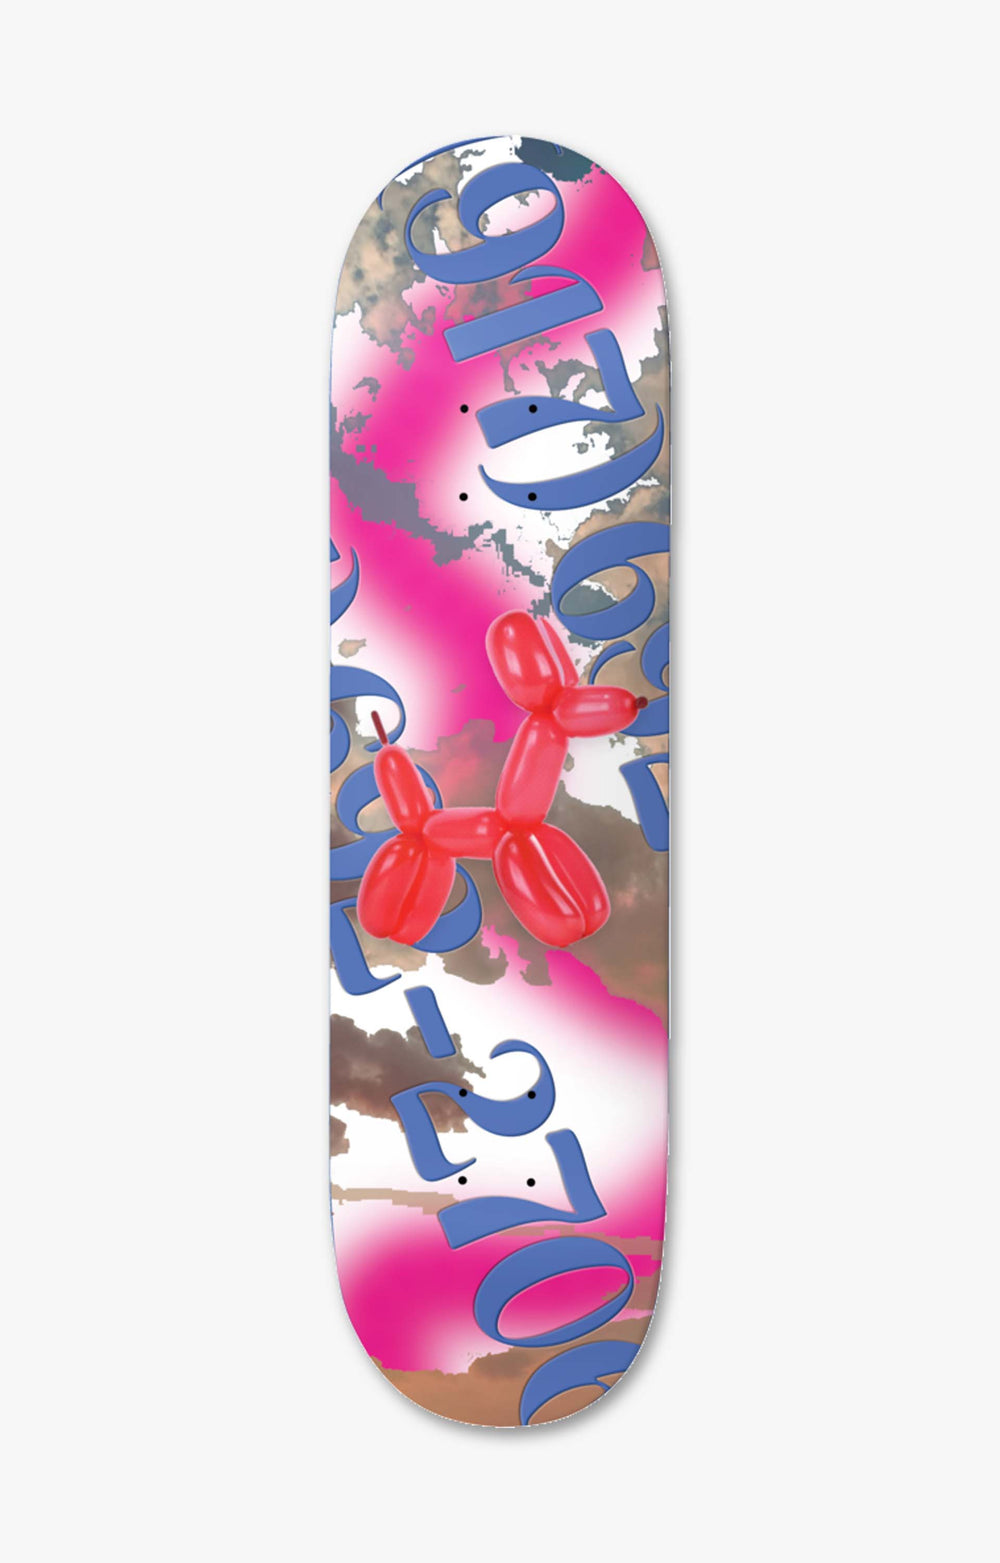 Call Me 917 Toy Skateboard Deck, 8.0